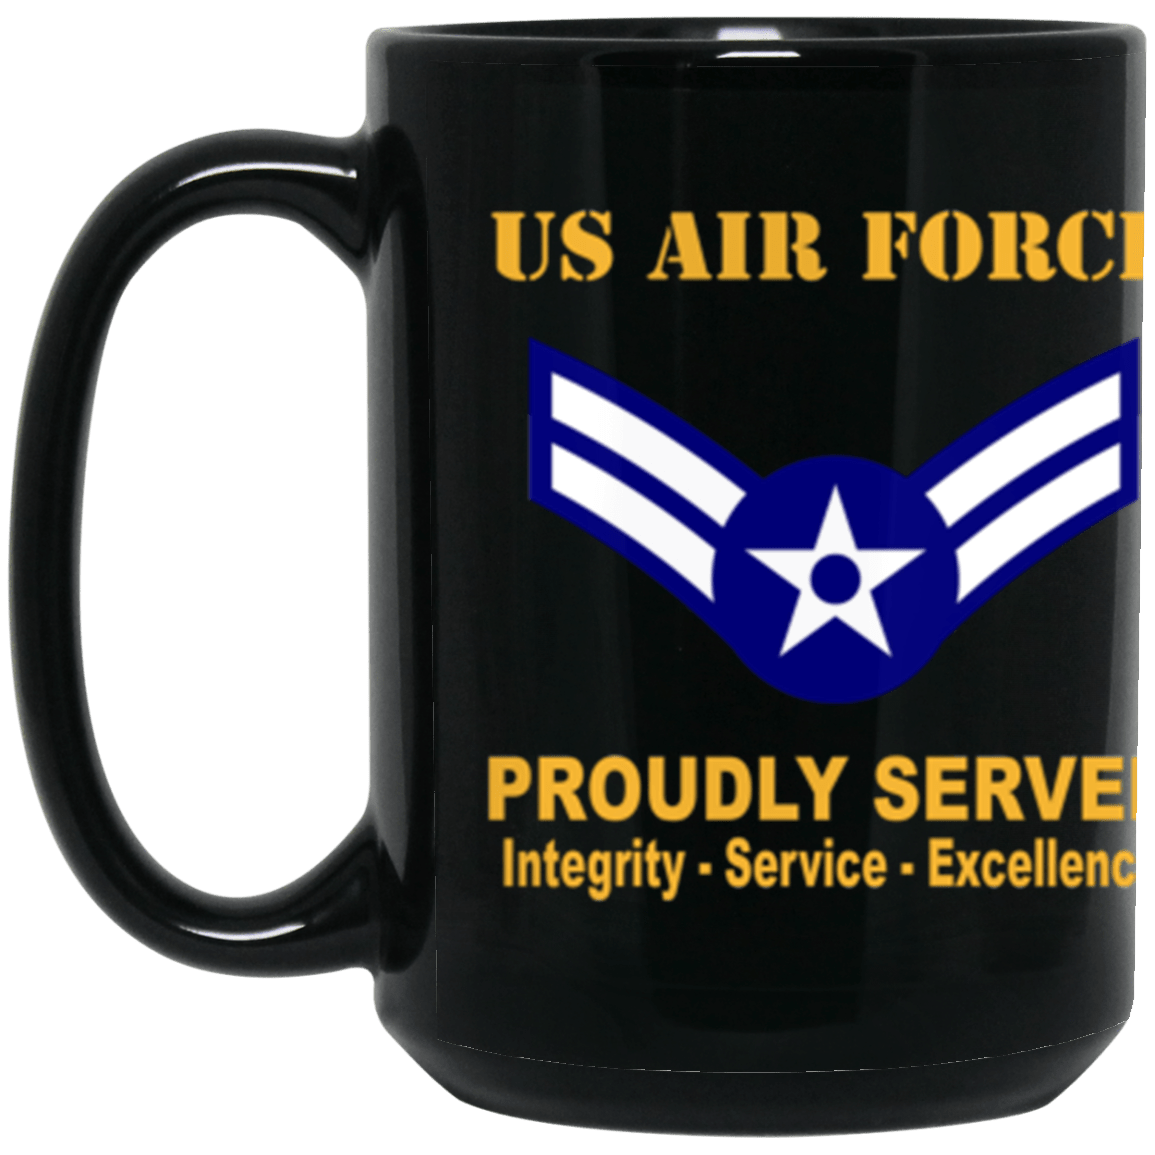 US Air Force E-3 Airman First Class A1C E3 Ranks Enlisted Airman AF Rank Proudly Served Core Values 15 oz. Black Mug-Drinkware-Veterans Nation